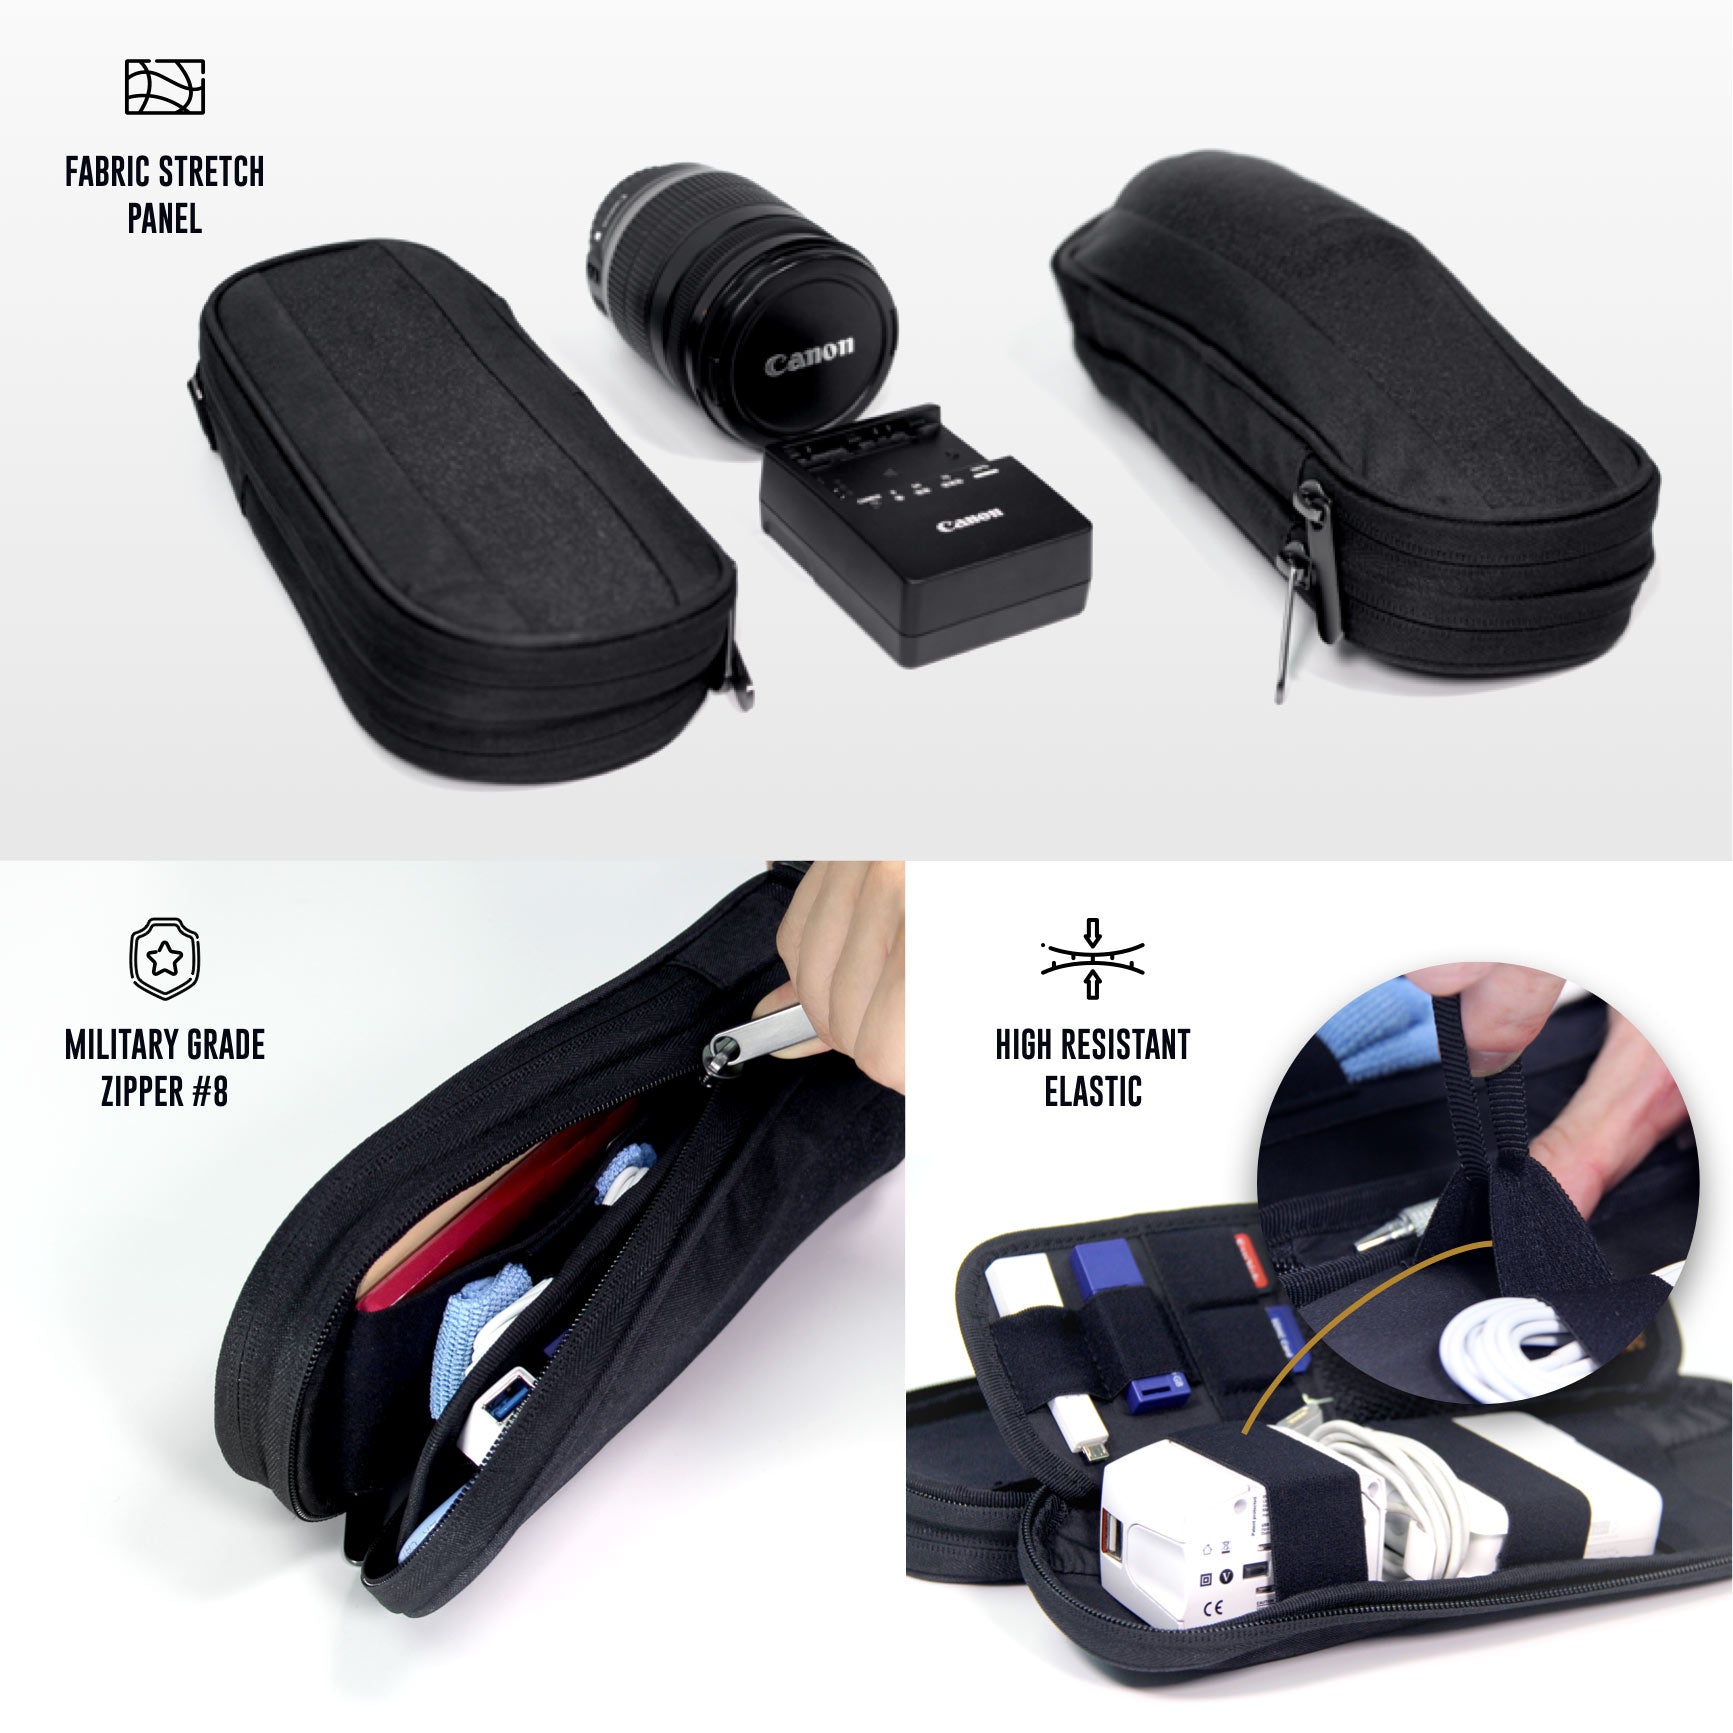 SIDE BY SIDE Power Packer | Travel Cord Organizer